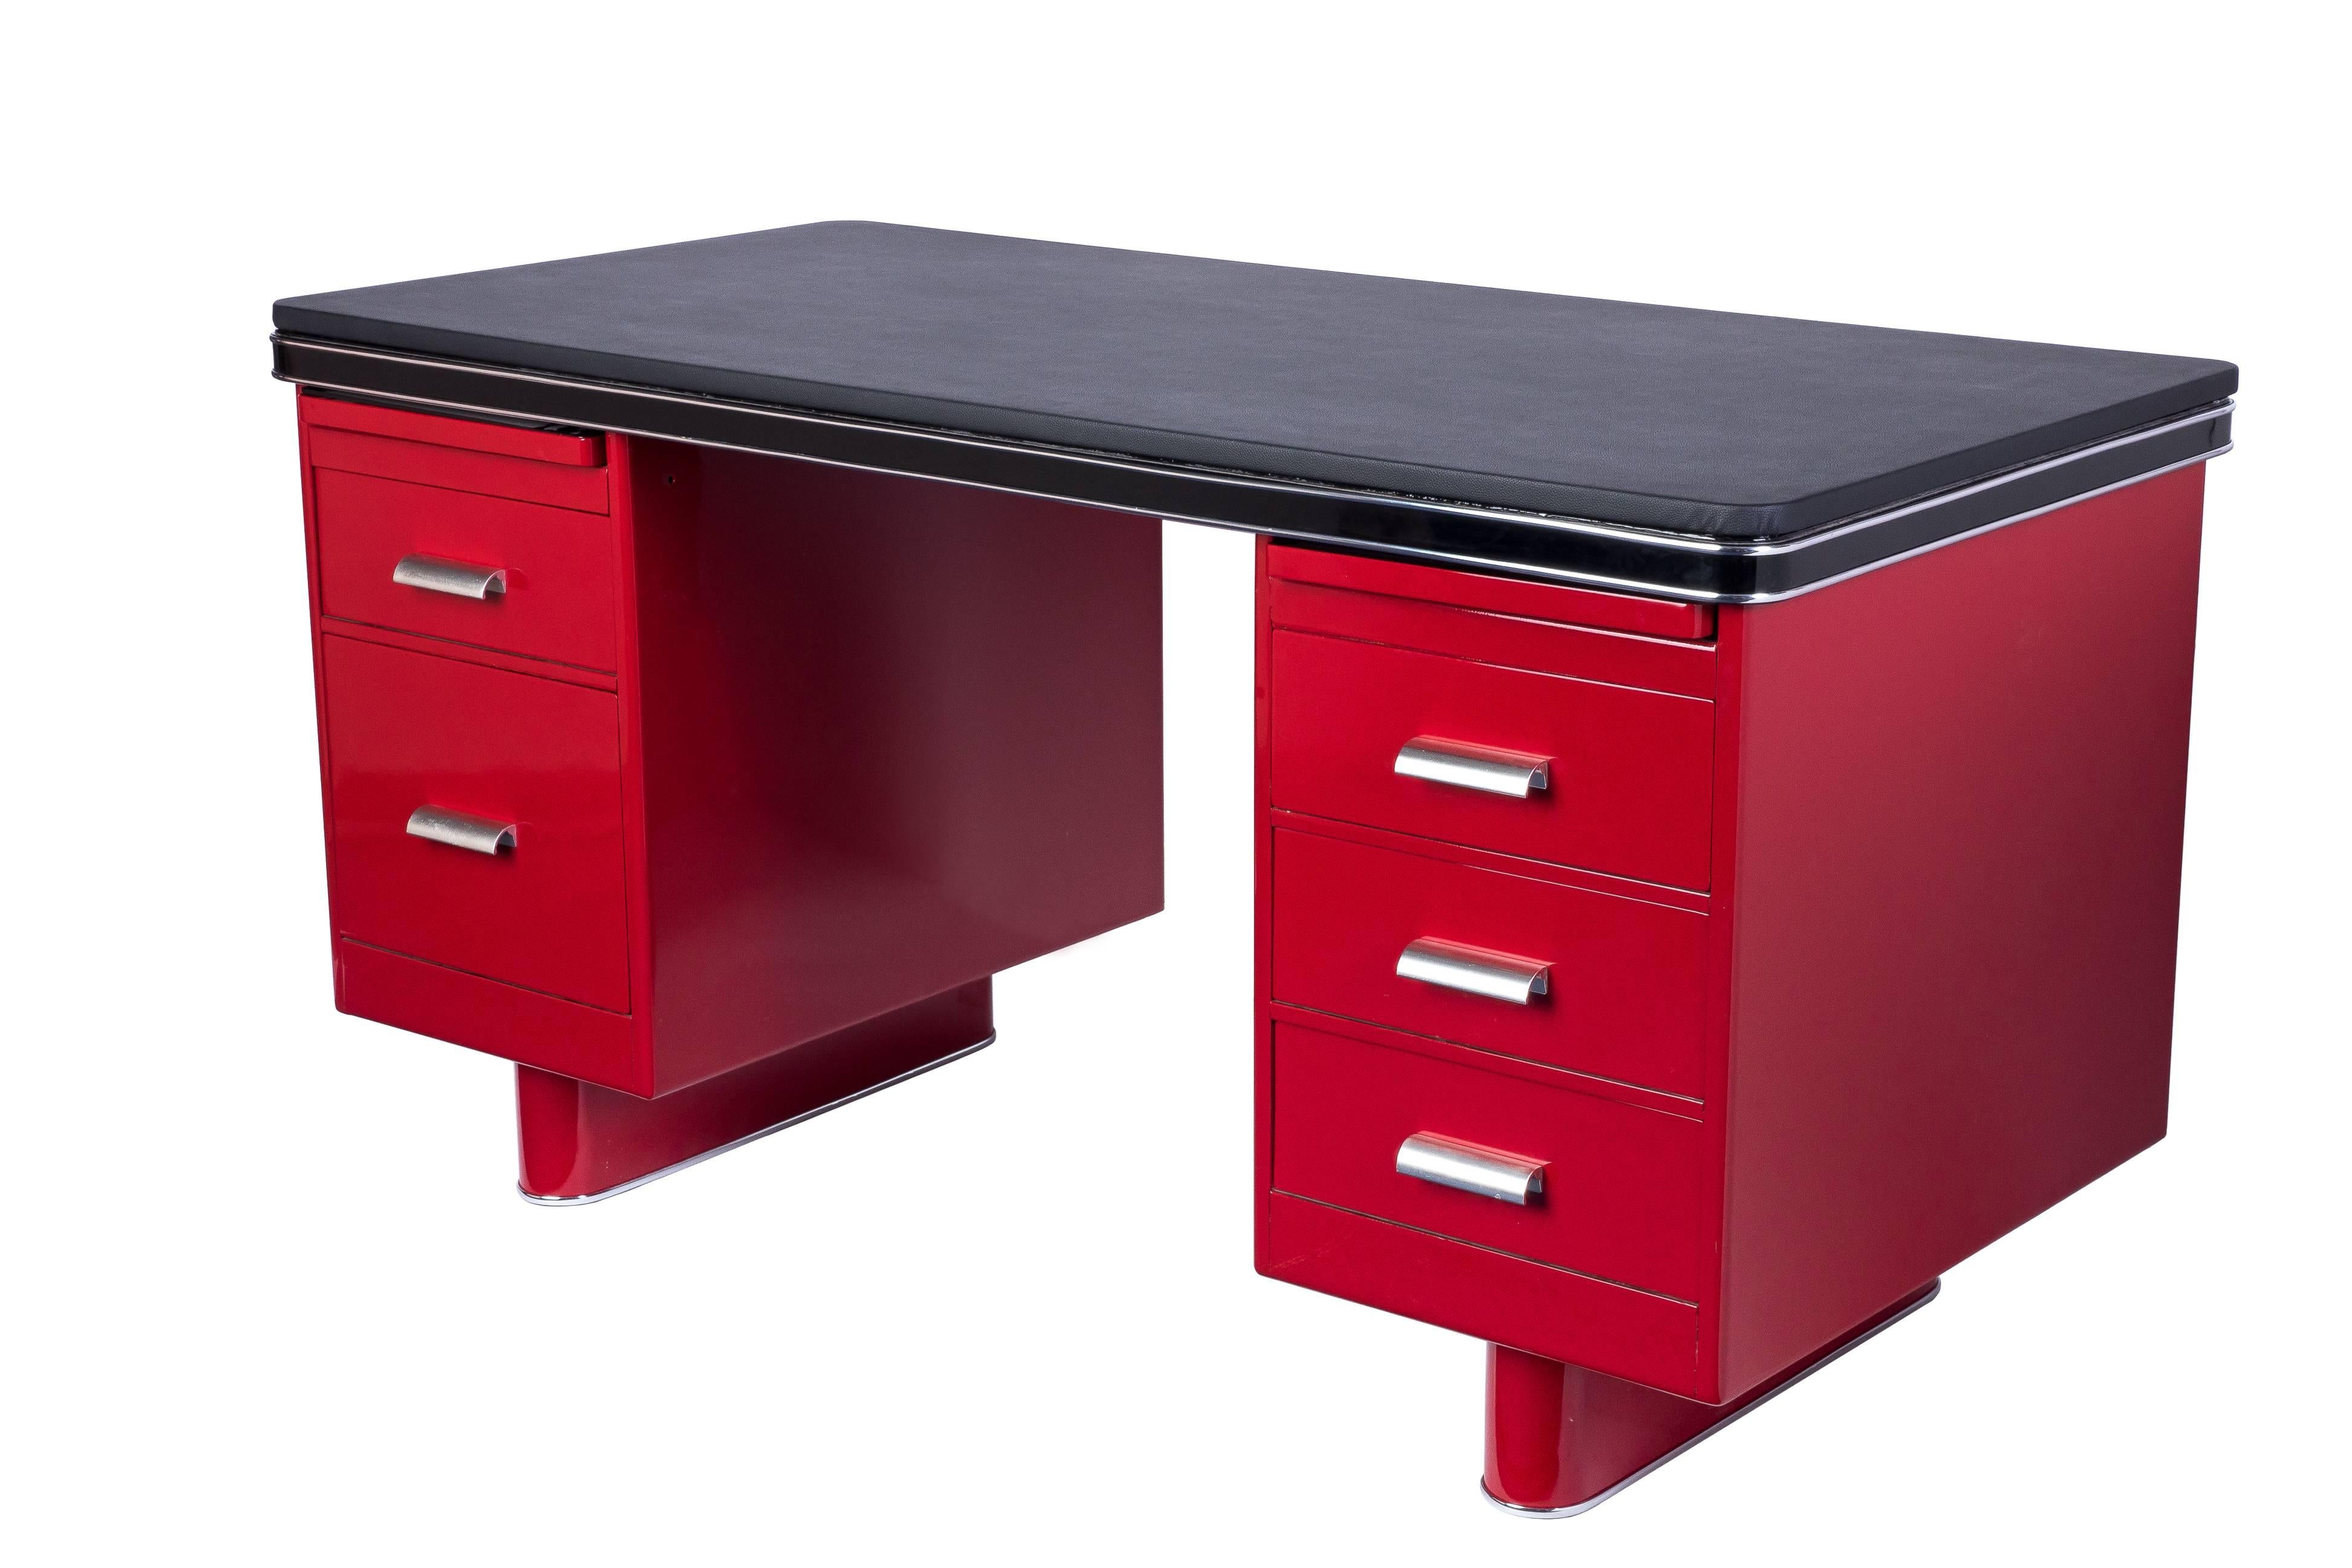 This wonderful turn of the 20th century metal desk was created by Bauhaus. It features chrome lines and fixtures with a high gloss lacquer in cherry and black leather top plate.